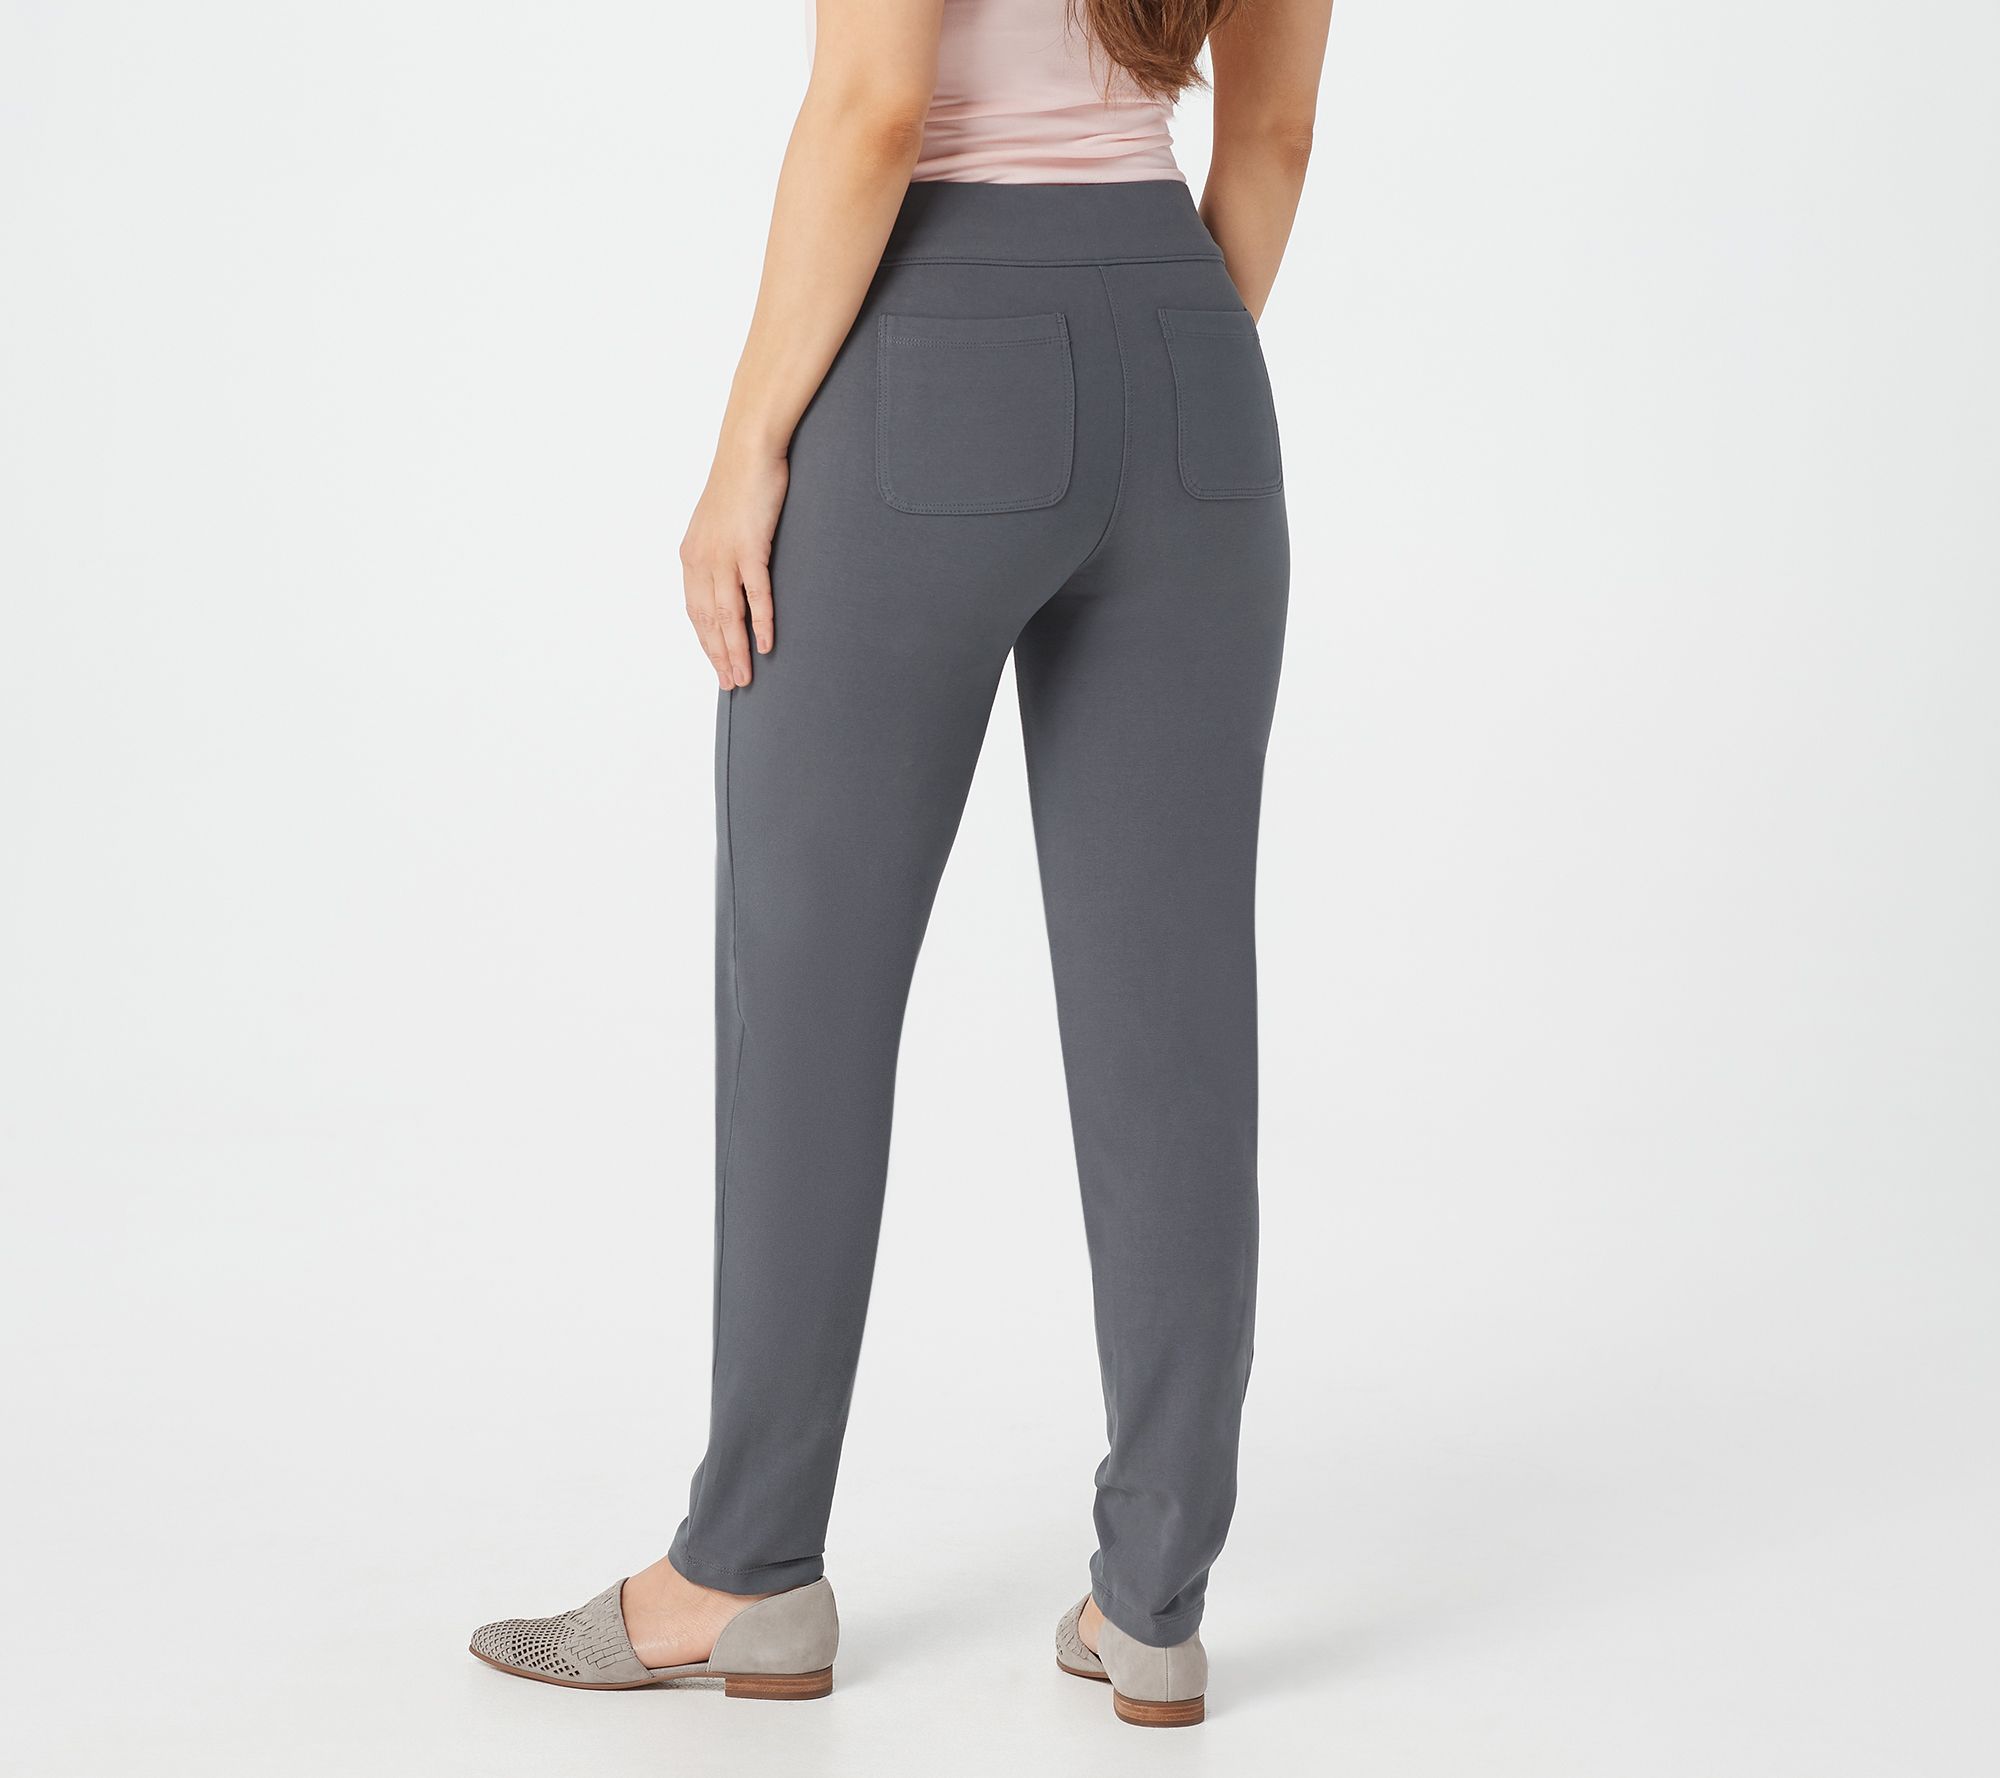 A347103 Susan Graver Petite Weekend Premium Stretch Pull-On Pants-461 